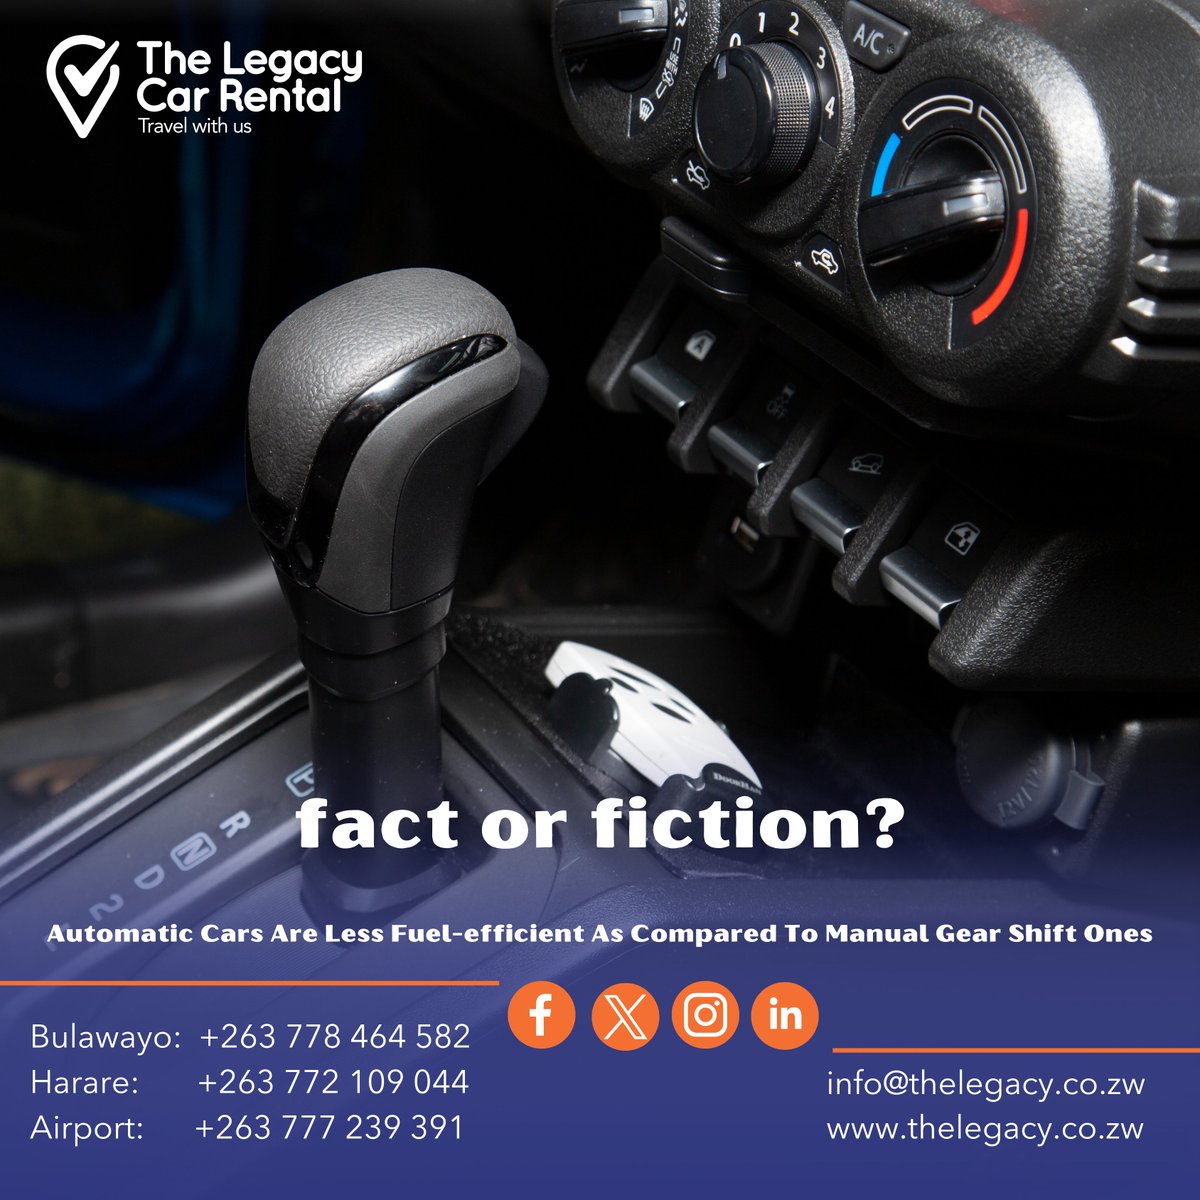 Automatic or Manual: Which side are you on? Join the debate and share your thoughts with us! #AutomaticVsManual #jointhedebate #travelcommunity #TravelDebate #shareyouropinionIs #whatdoyouthink #whatwouldyoudo #TravelWithUs #TheLegacy